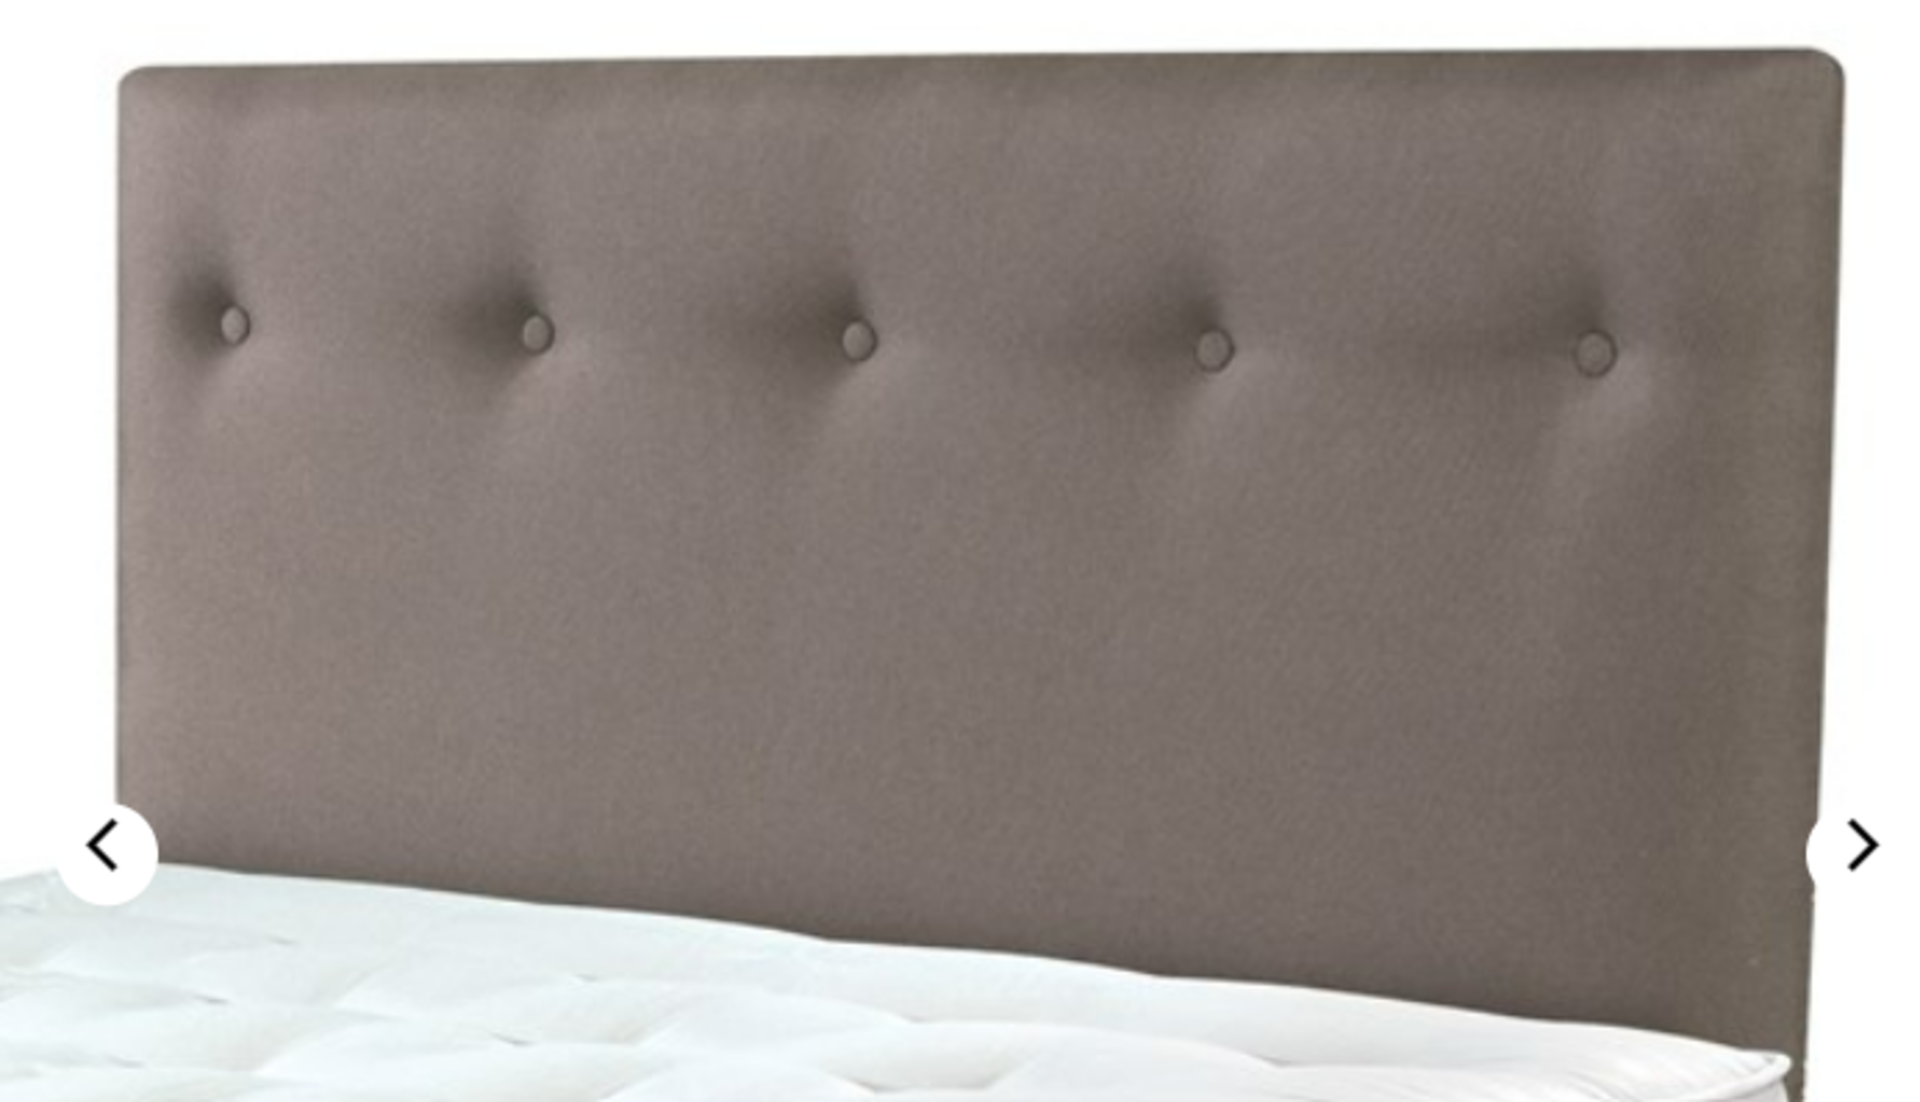 Carpetright Alaska 5Ft King Size Headboard Americano RRP Â£299.00 - This item looks to be in good